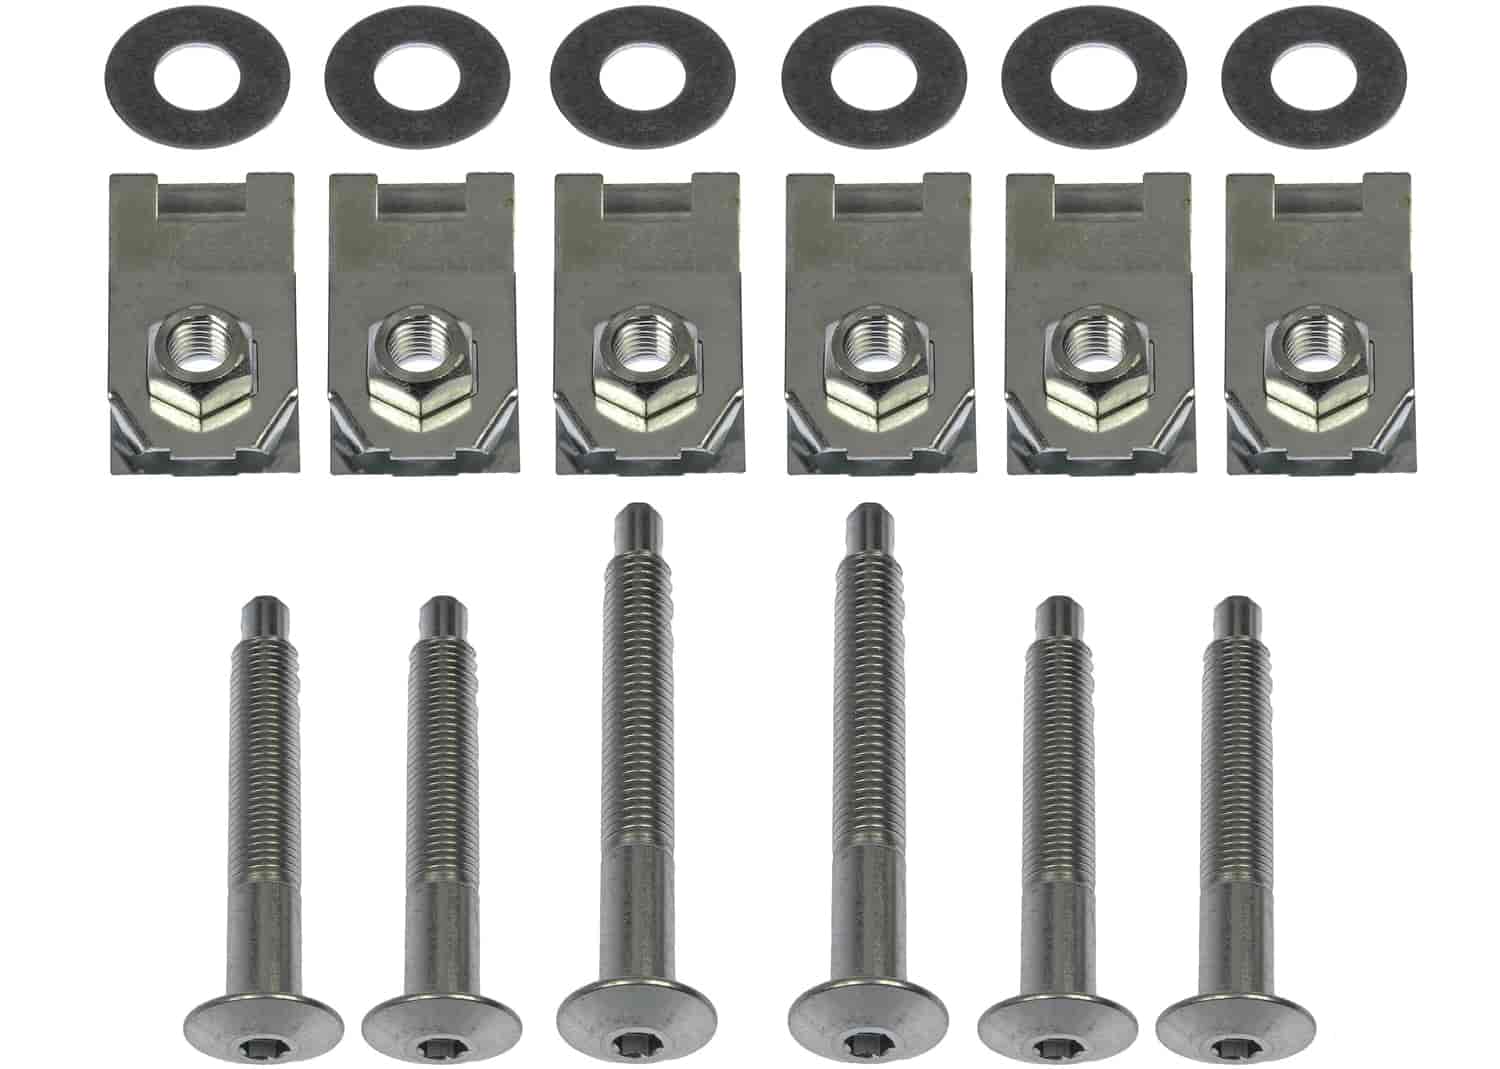 Truck Bed Mounting Hardware 1983-2011 Ford Ranger, 1994-2010